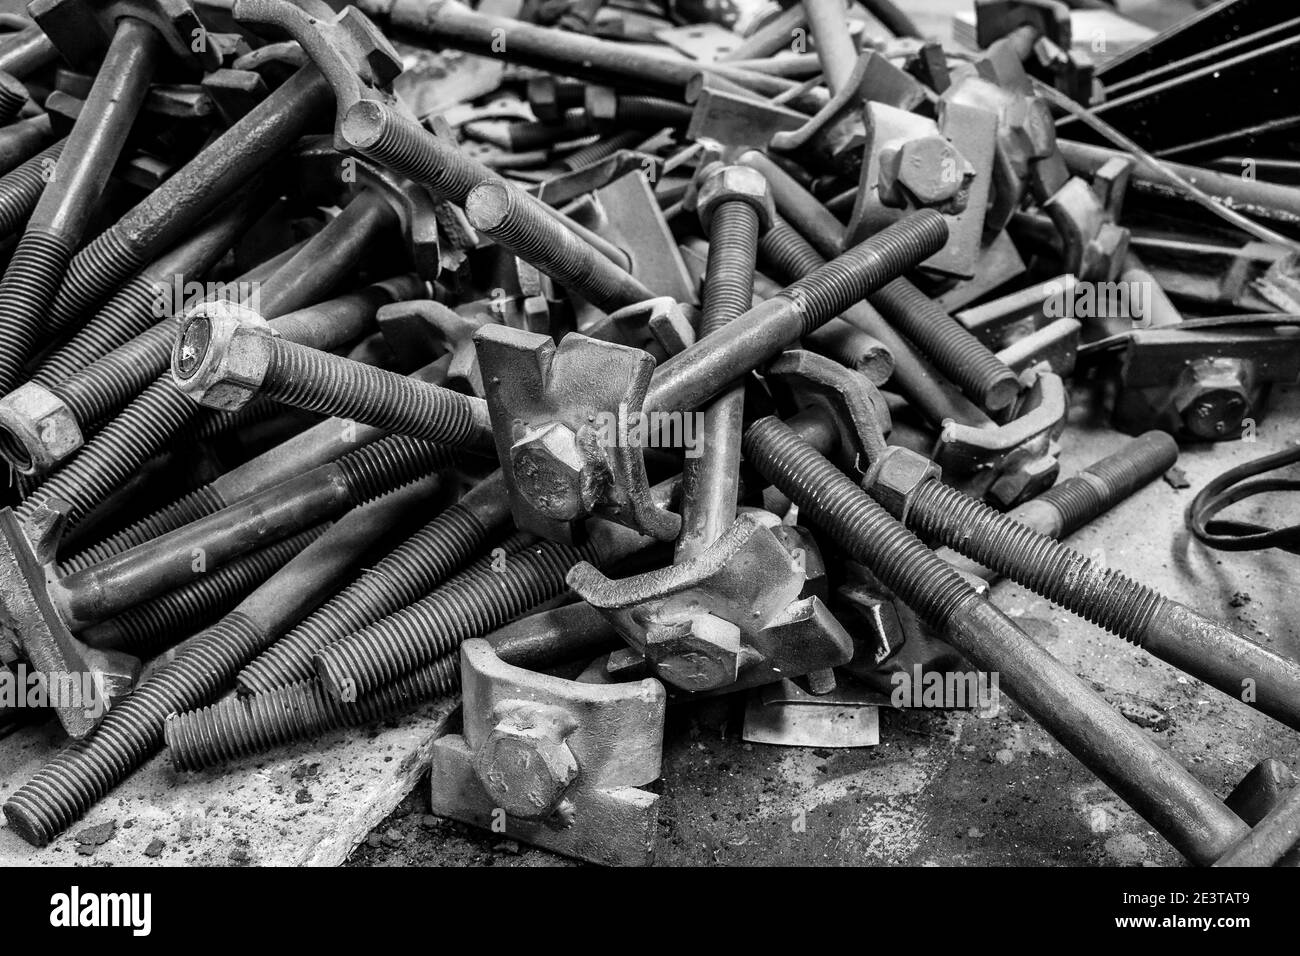 A pile of nuts and long bolts in the workshop of the Oamaru Steam and Rail Restoration Society, Oamaru, New Zealand. Stock Photo